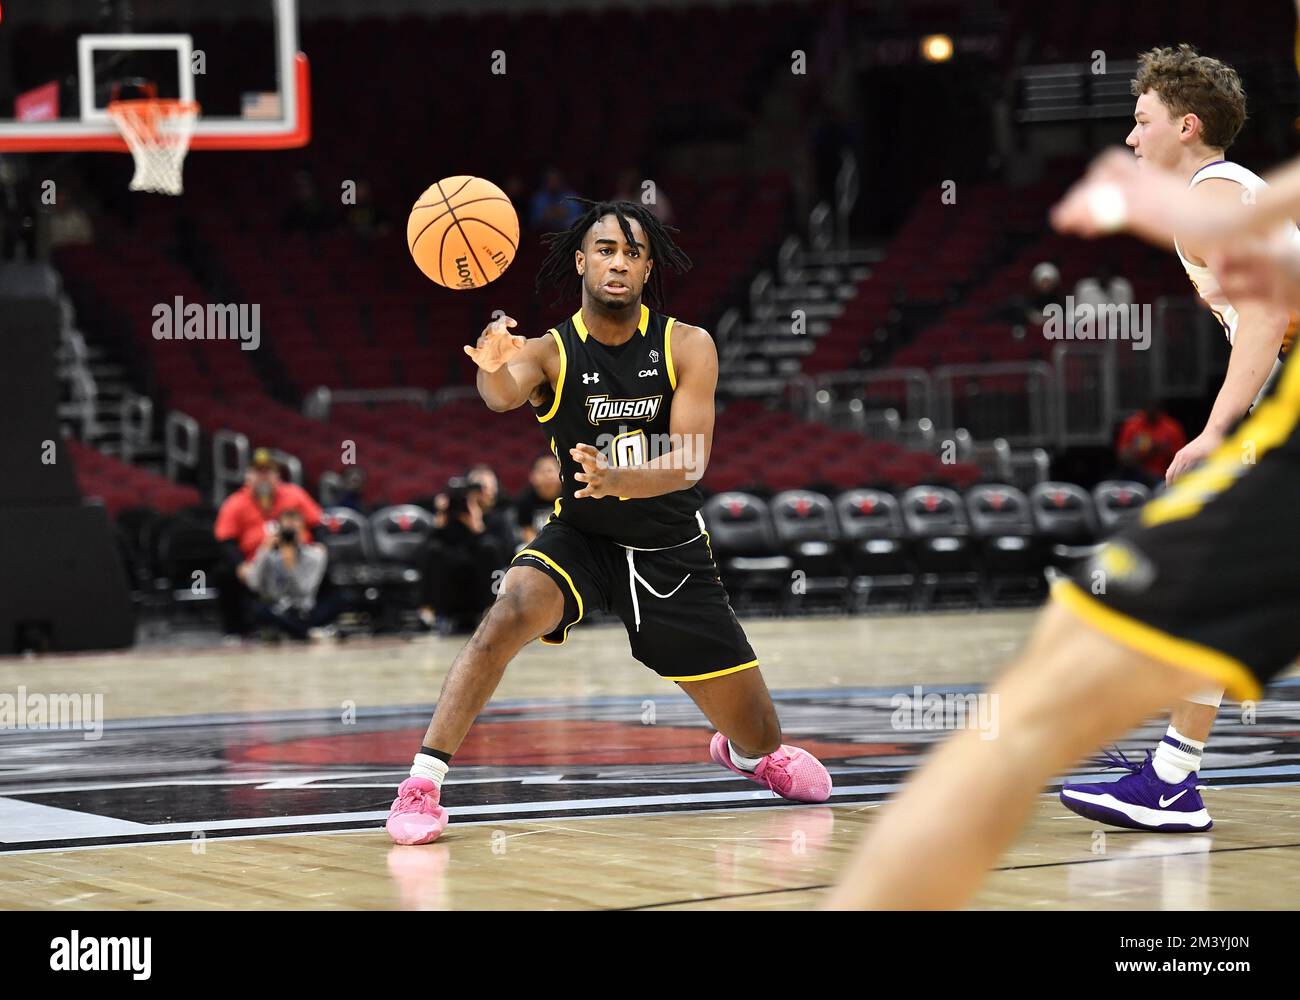 Chicago, Illinois, USA. 17th Dec, 2022. Towson Tigers guard Ryan Conway (0) passes the ball during the NCAA basketball game between Northern Iowa vs Towson at United Center in Chicago, Illinois. Dean Reid/CSM/Alamy Live News Stock Photo